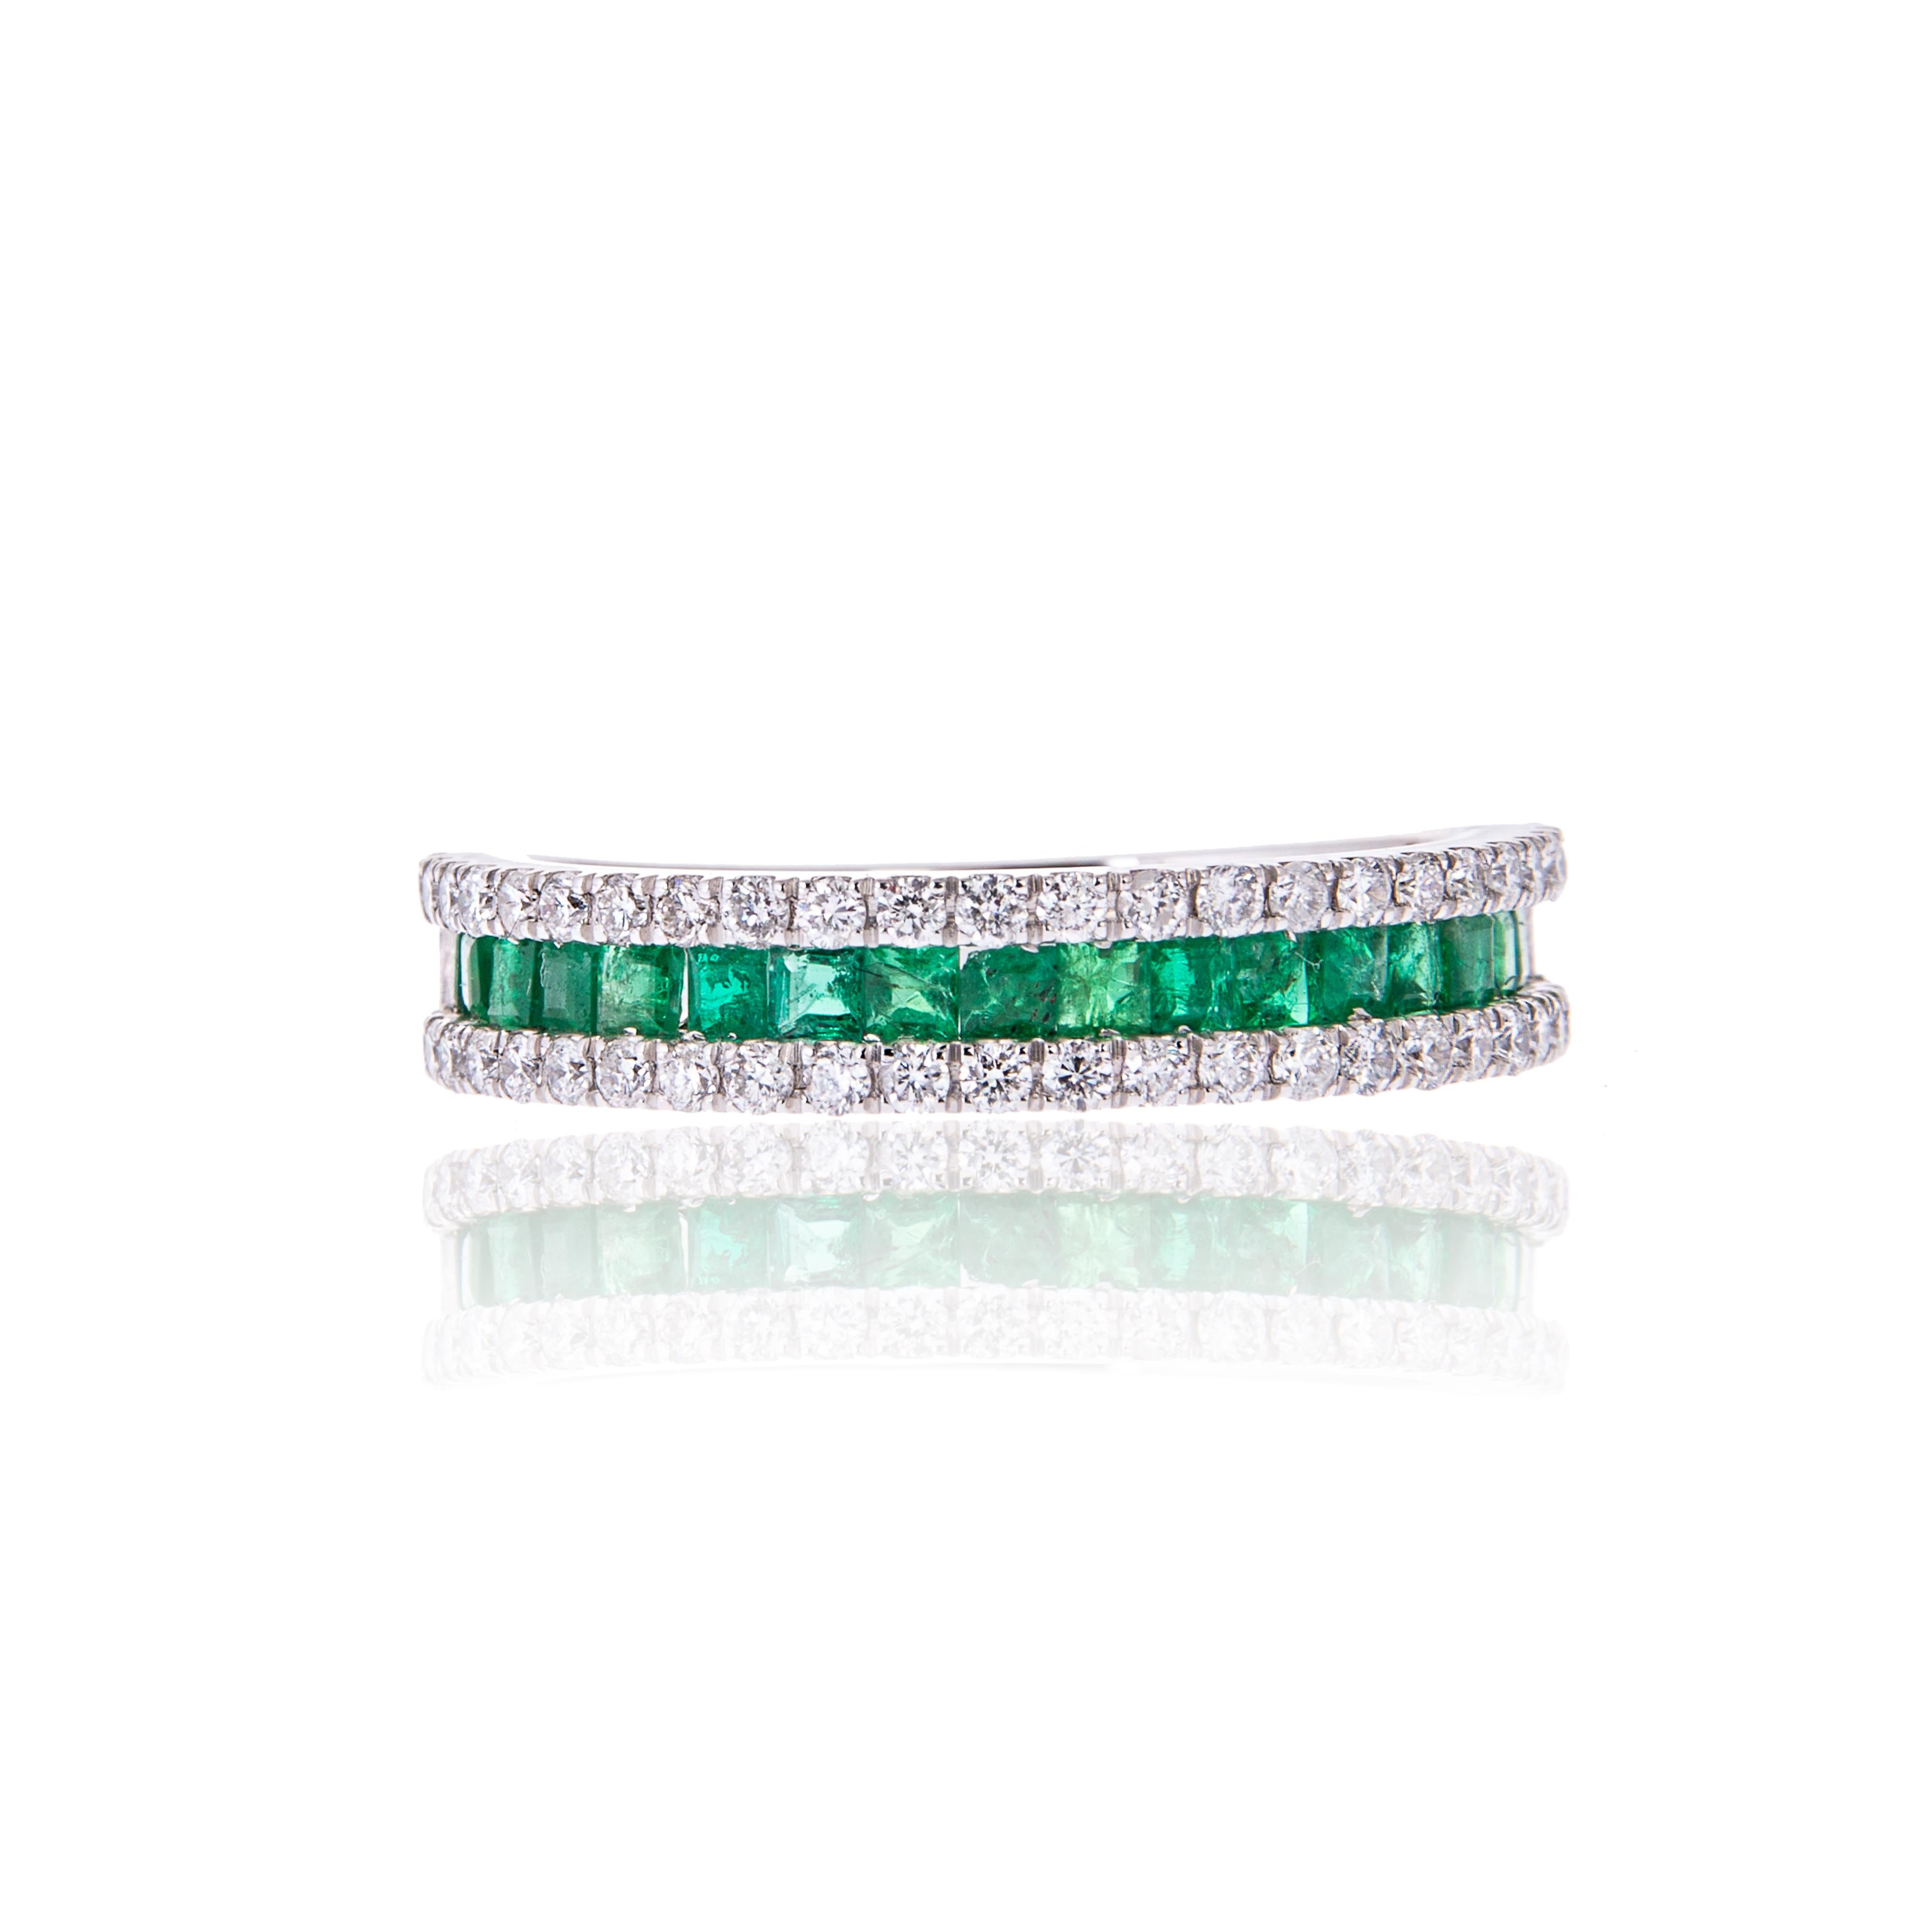 An elegant  emerald and diamond ring set in 18ct white gold.

Perfect gift to your lady love on her birthday or any special occasion

Diamonds: 0.50ct  
Colour and Clarity: F  SI

Emerald: 0.50ct

Metal Purity: 18ct white gold

British